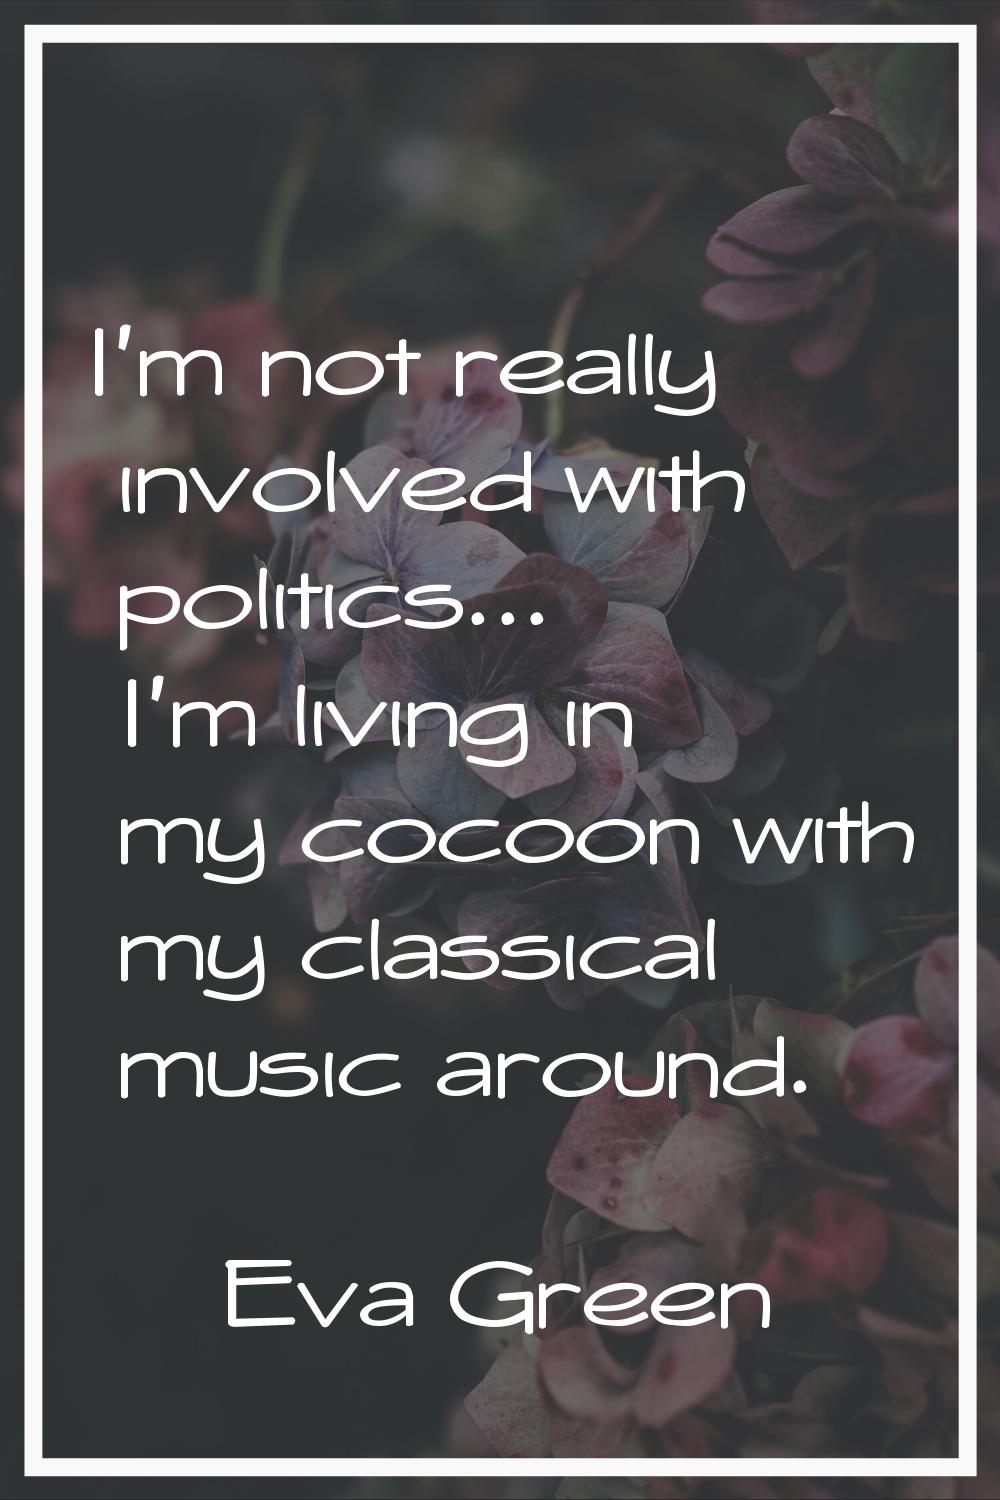 I'm not really involved with politics... I'm living in my cocoon with my classical music around.